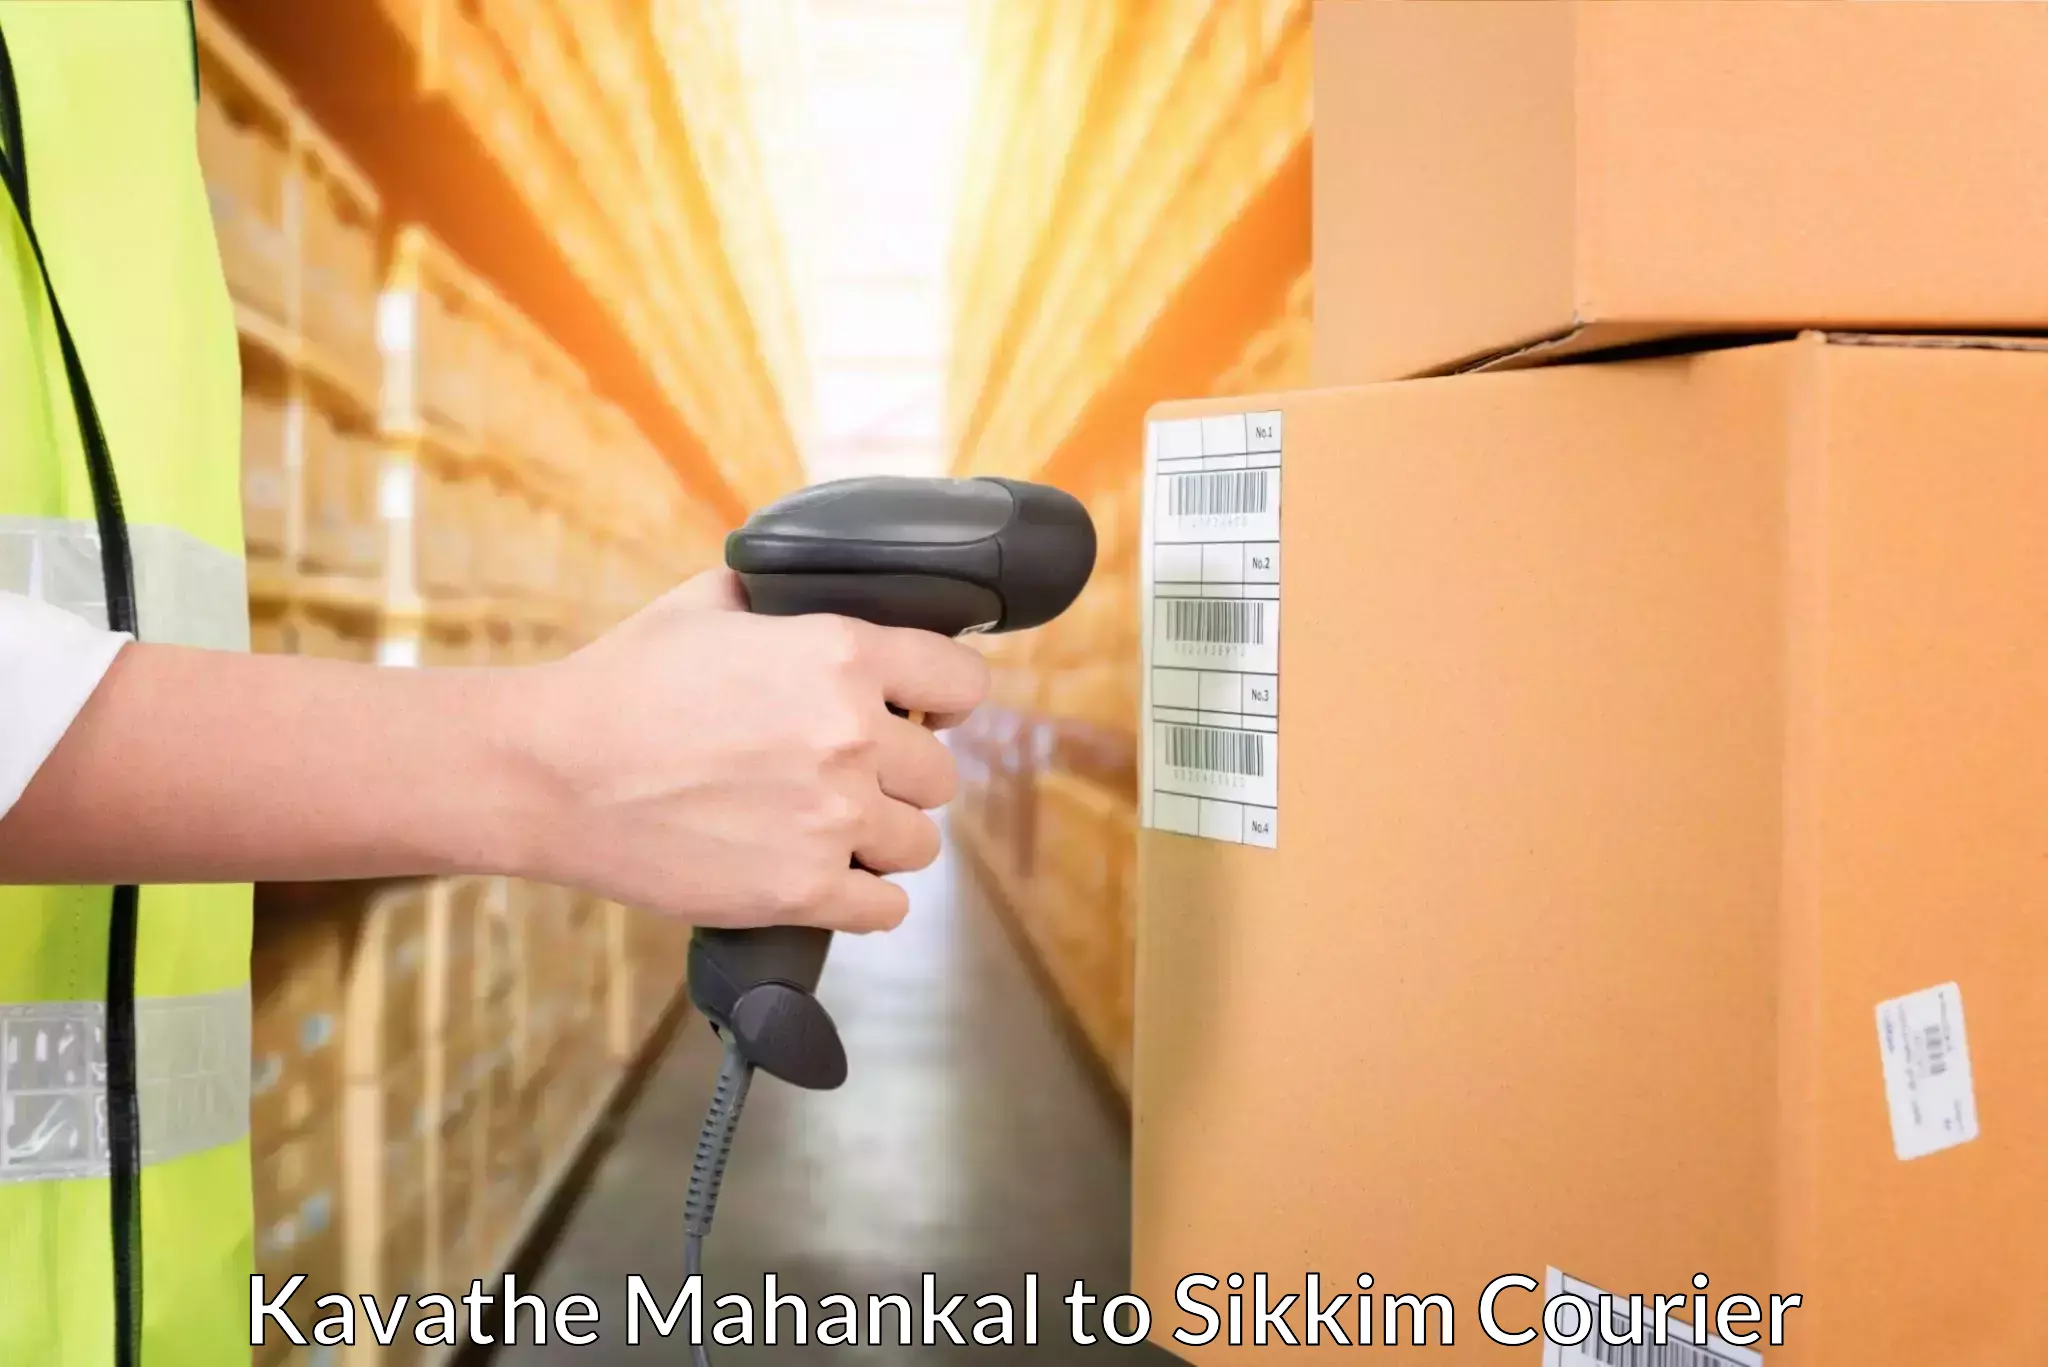 Multi-service courier options Kavathe Mahankal to Geyzing